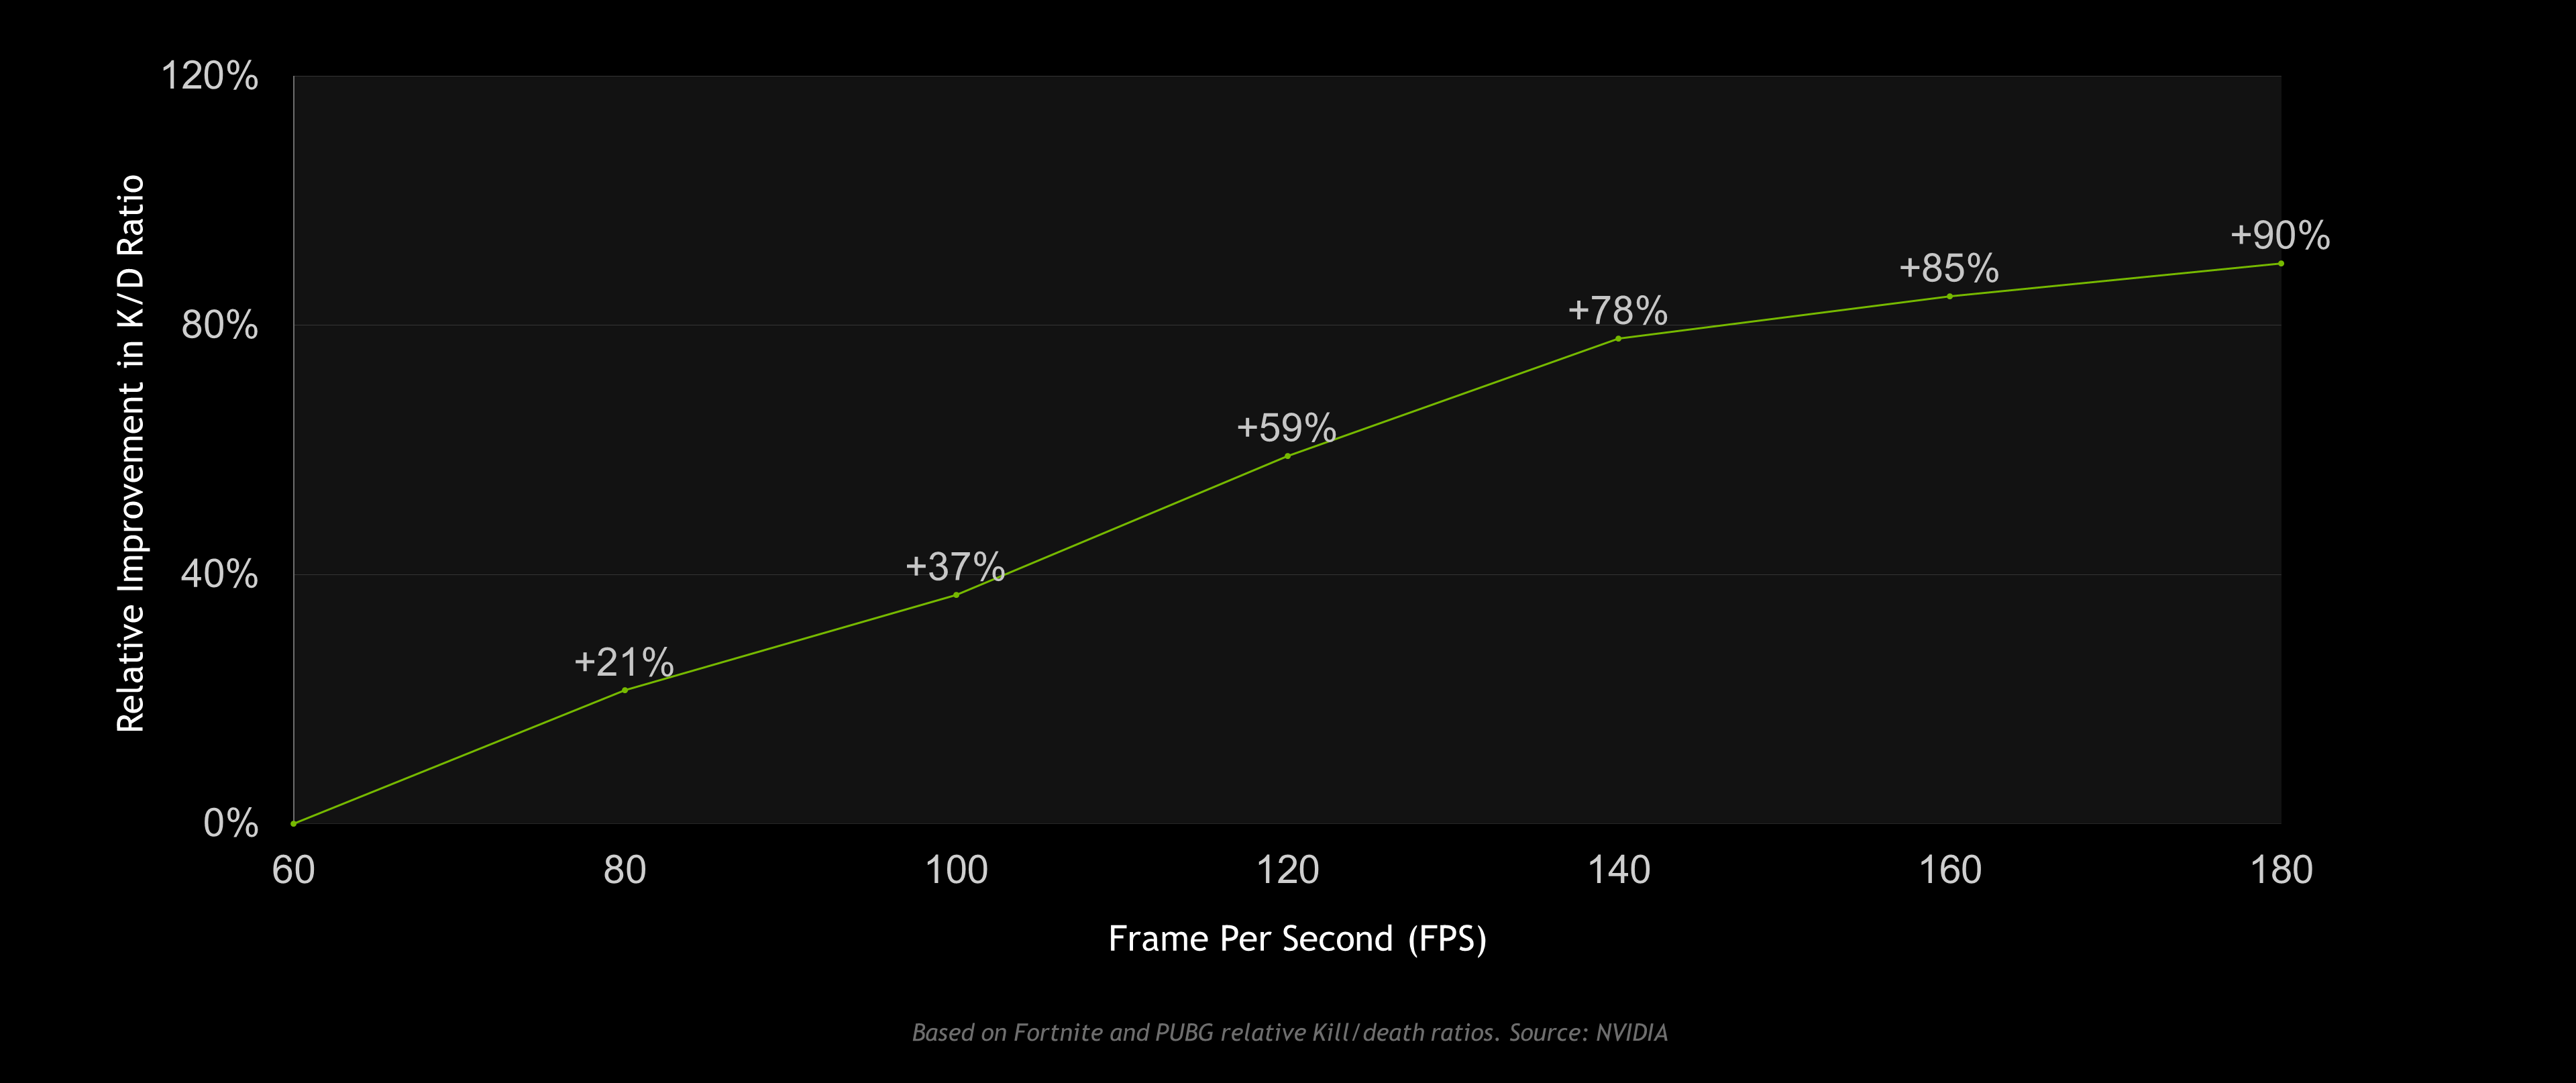 Improving Player Performance with Low Latency as Evident from FPS